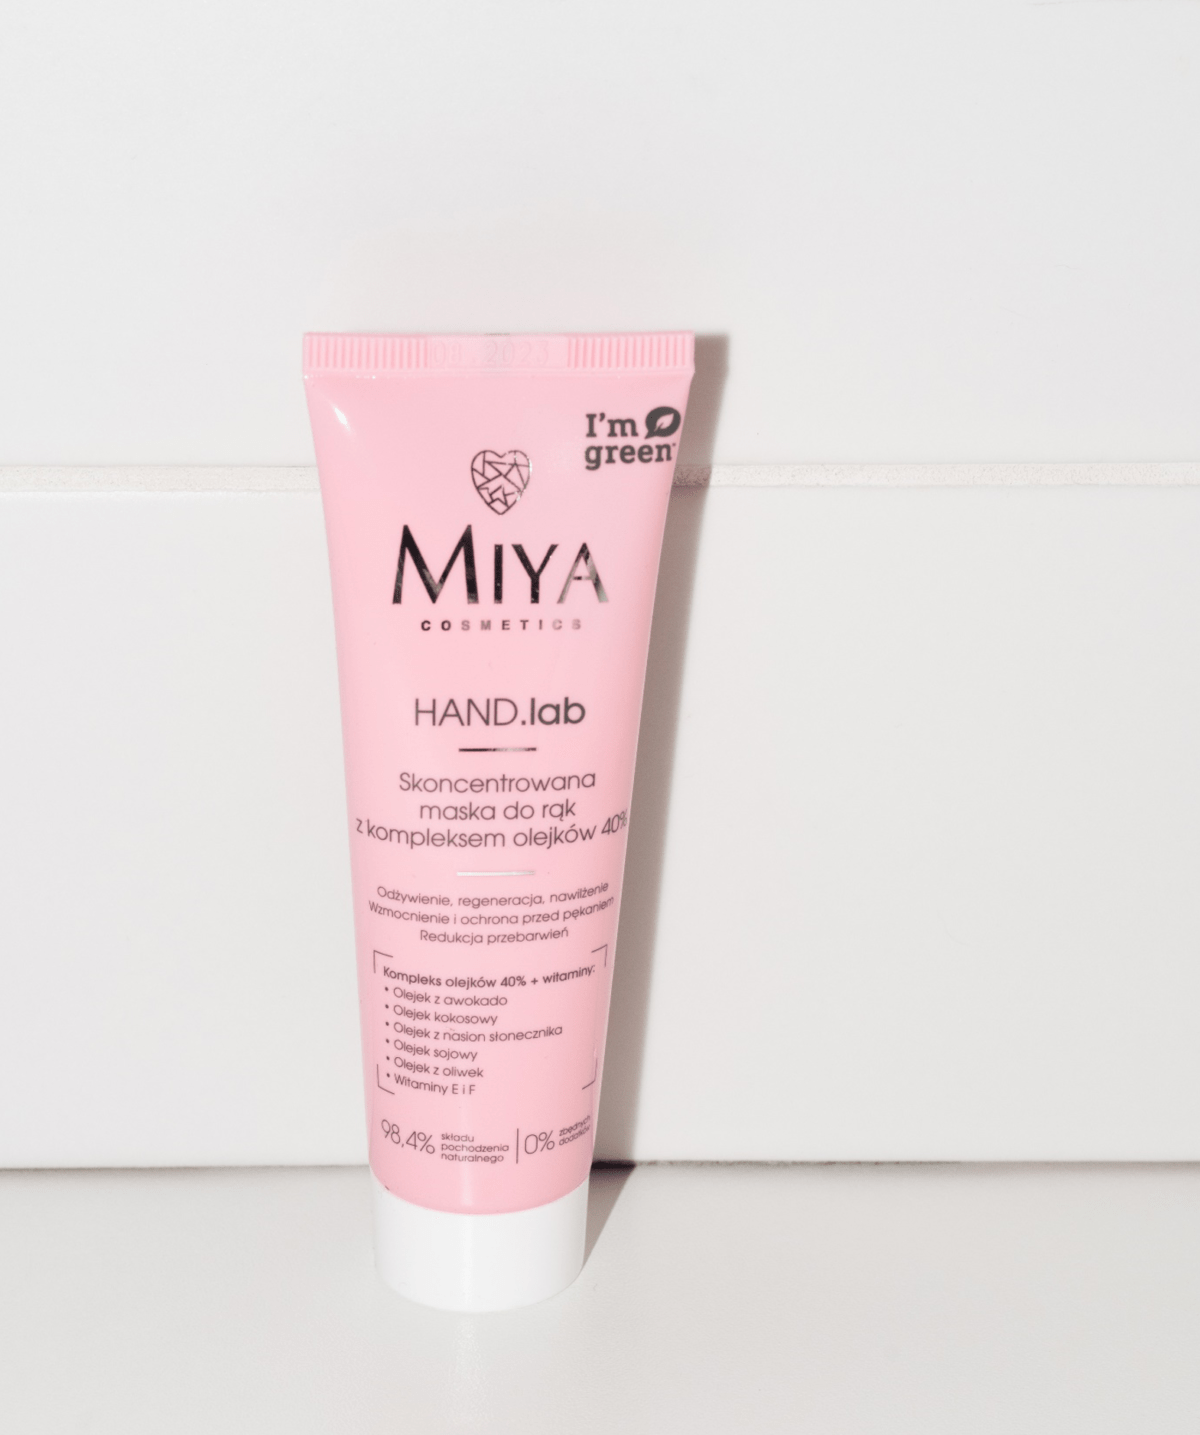 Концентрована маска для рук та нігтів Miya Cosmetics Hand Lab Concentrated Mask For Hands & Nails With A Complex Of Oils 40% 50 мл - фото 3